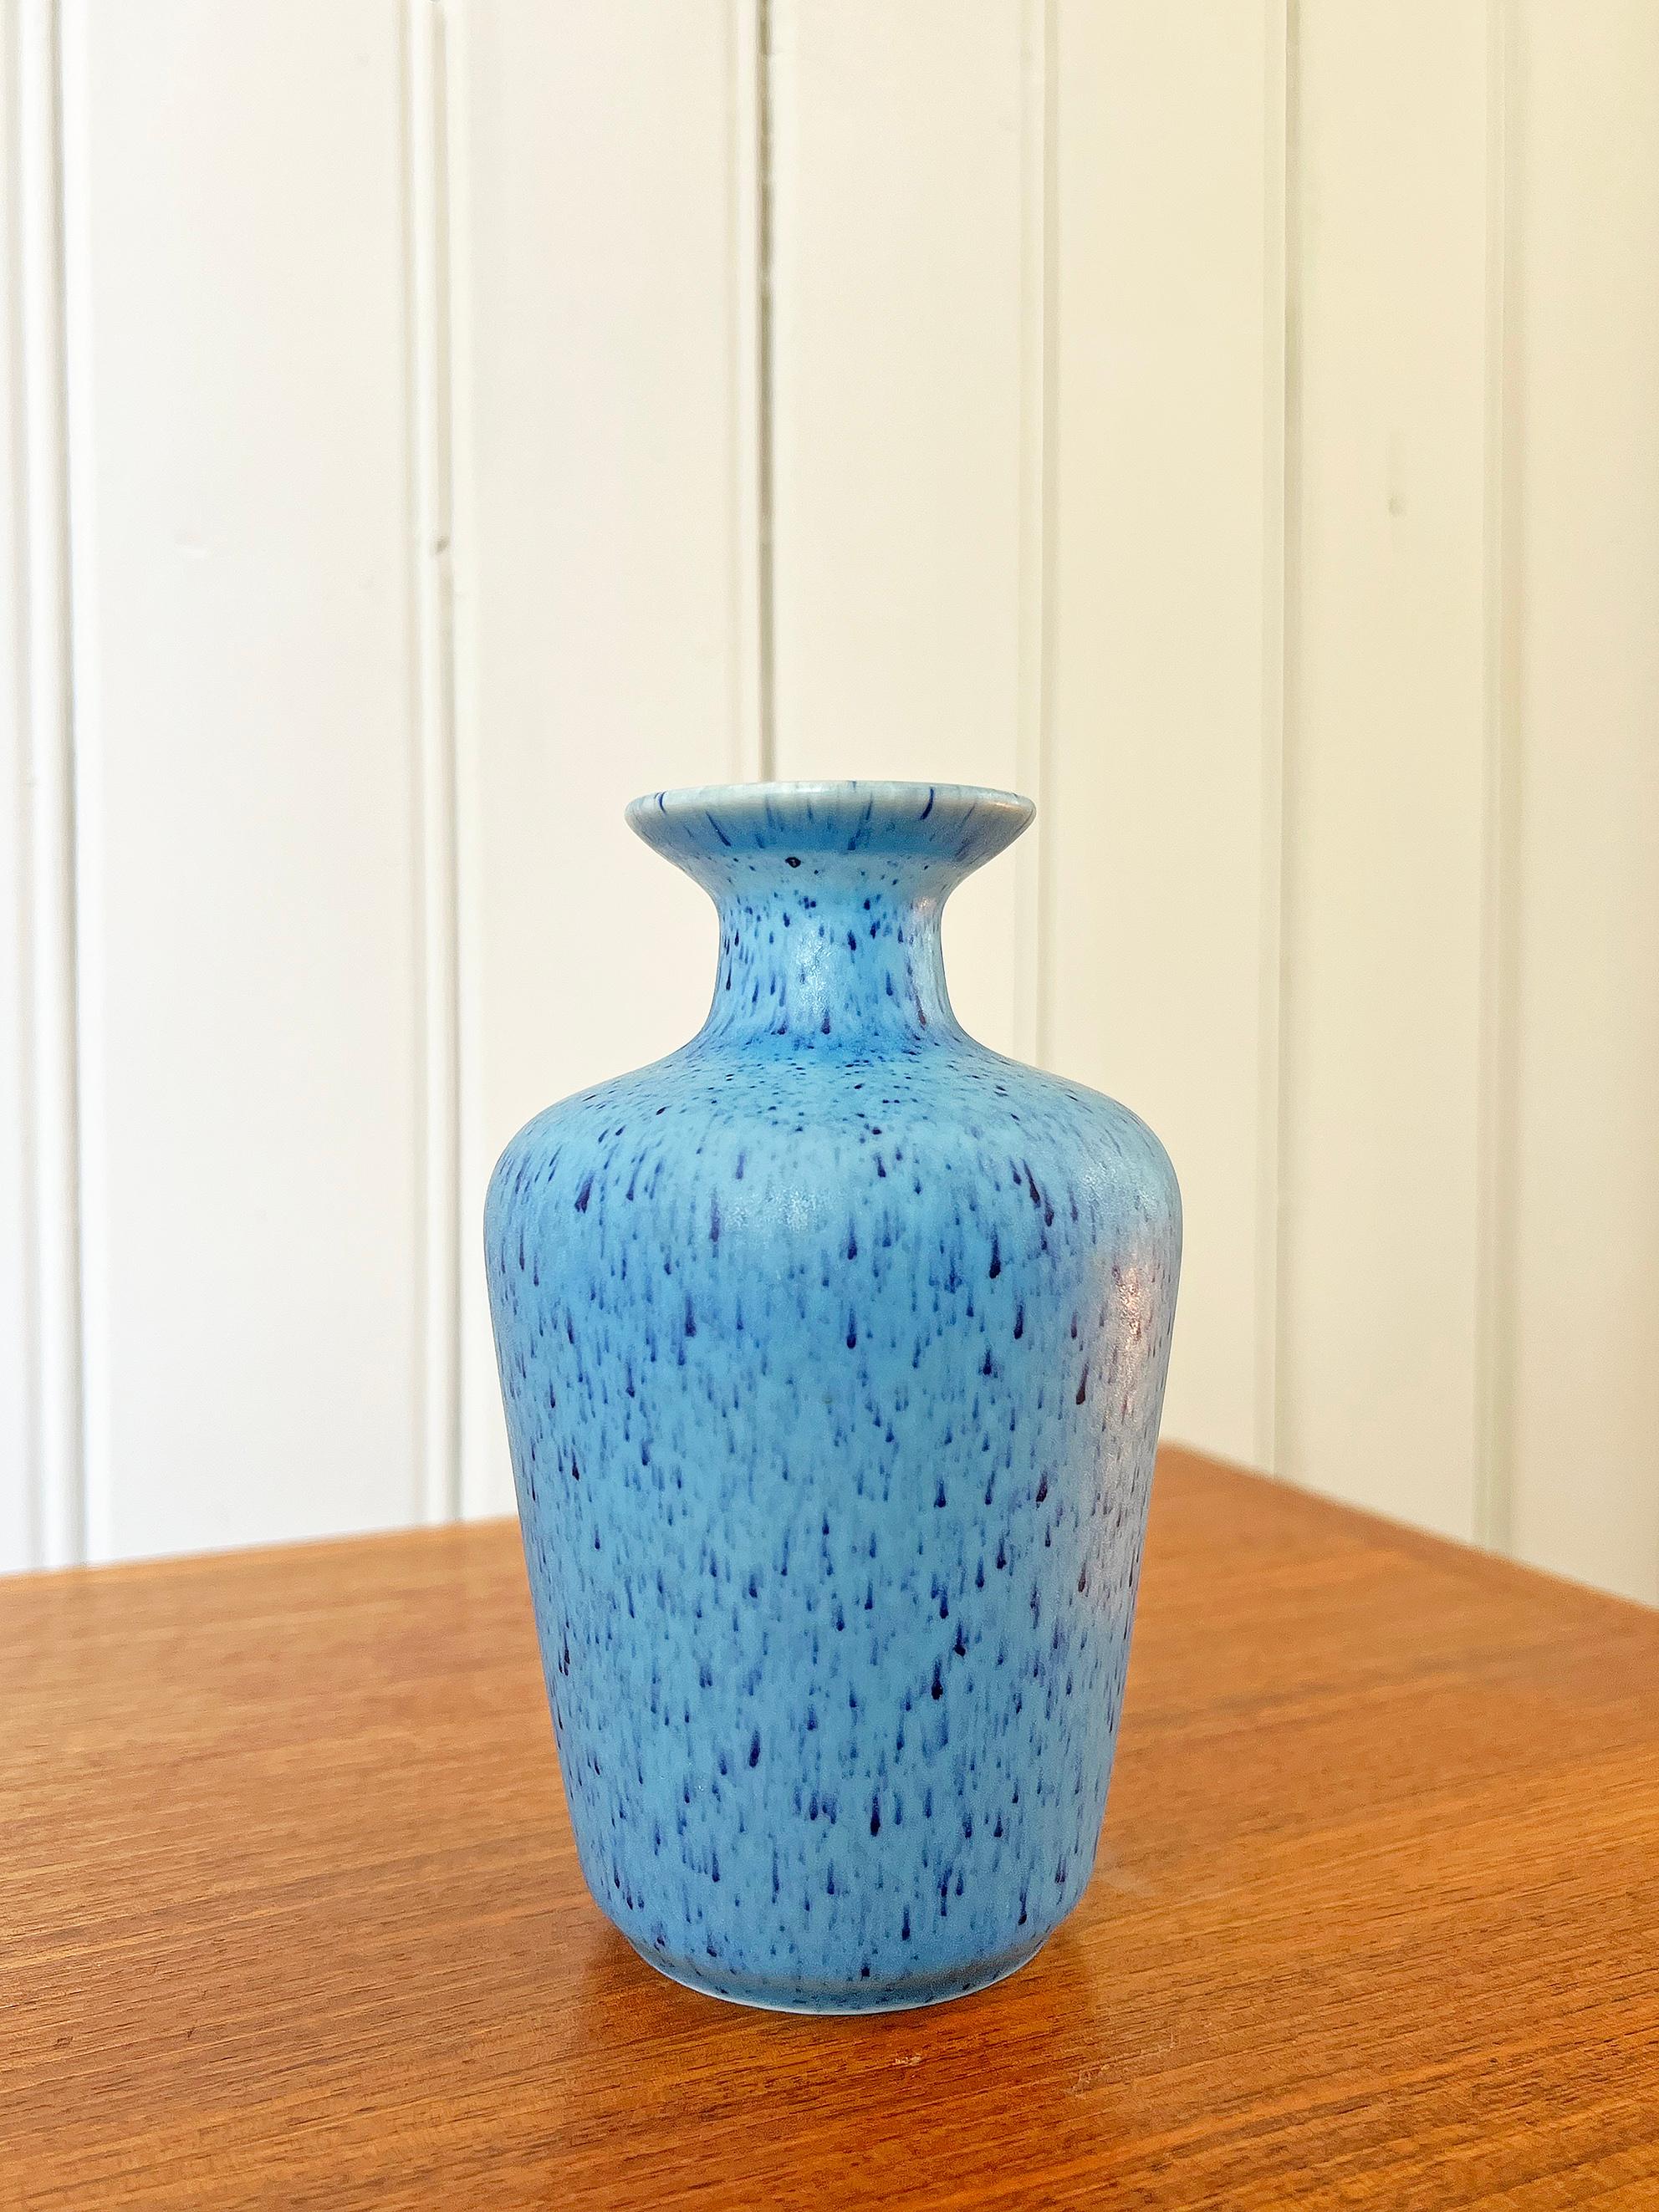 Beautiful vase from the 